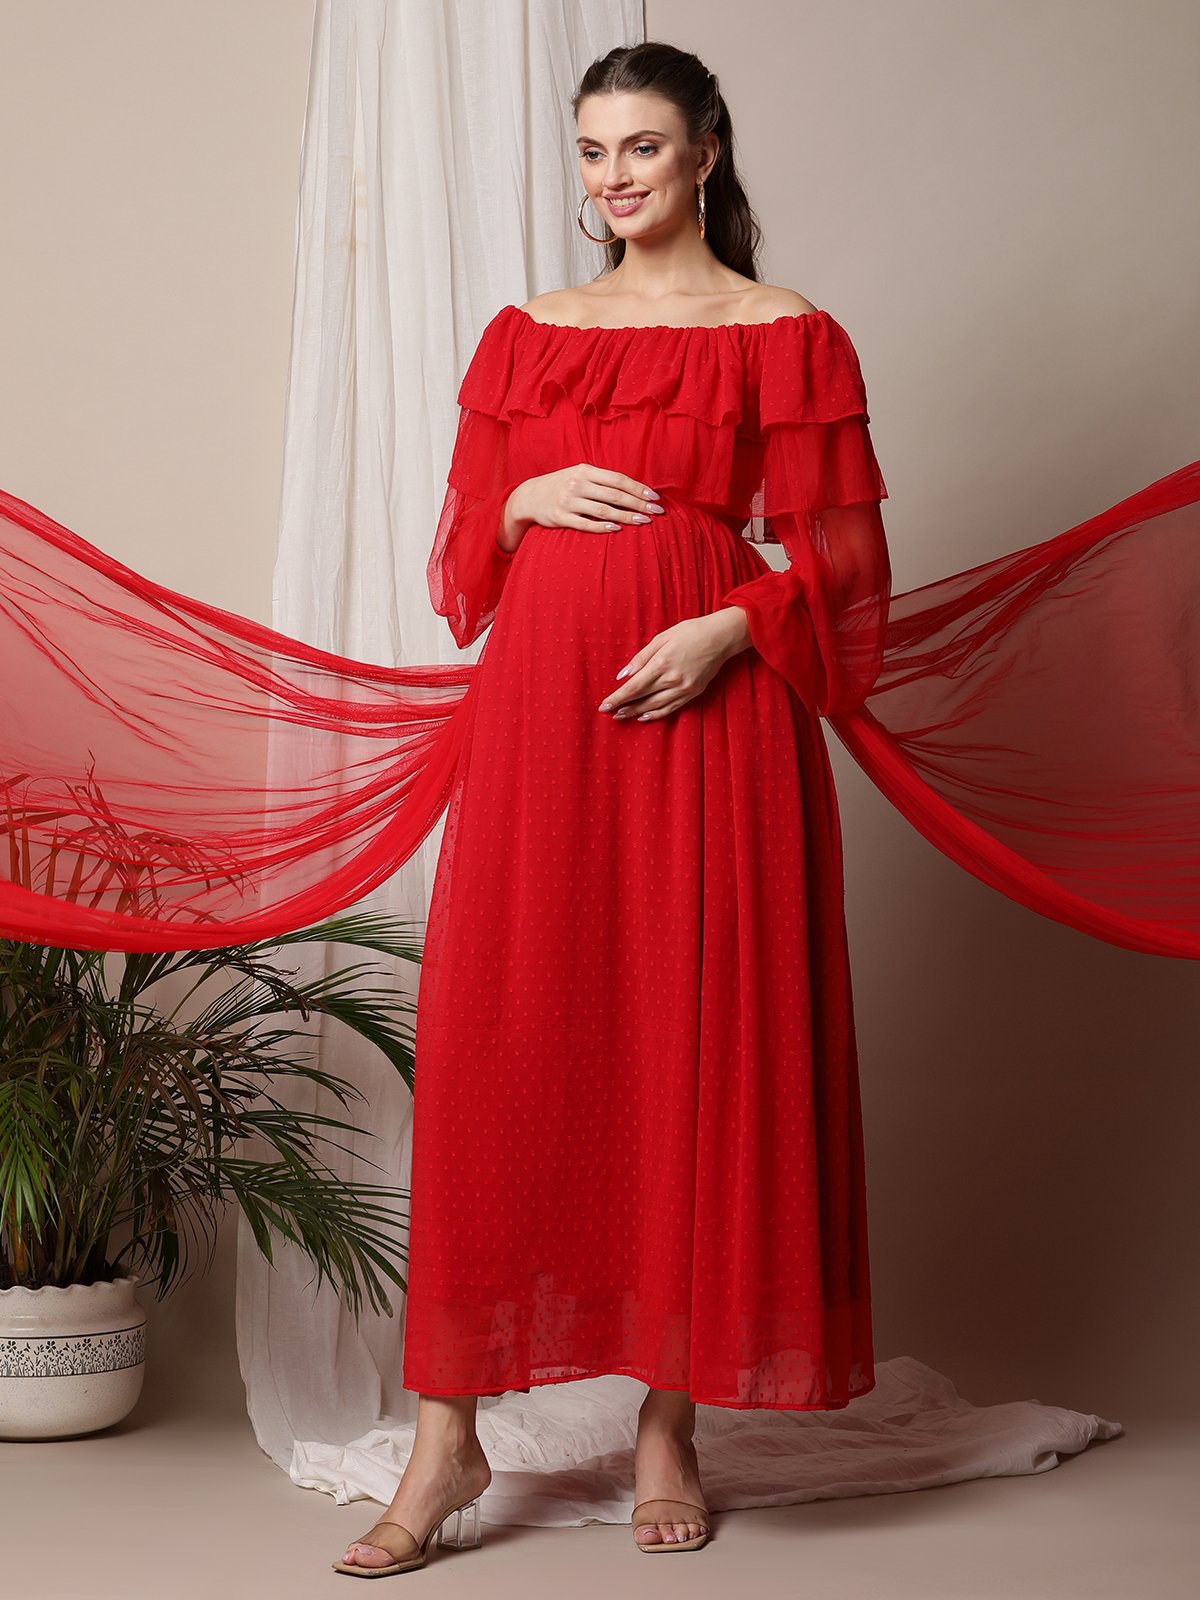 Details more than 78 corporate maternity gowns best